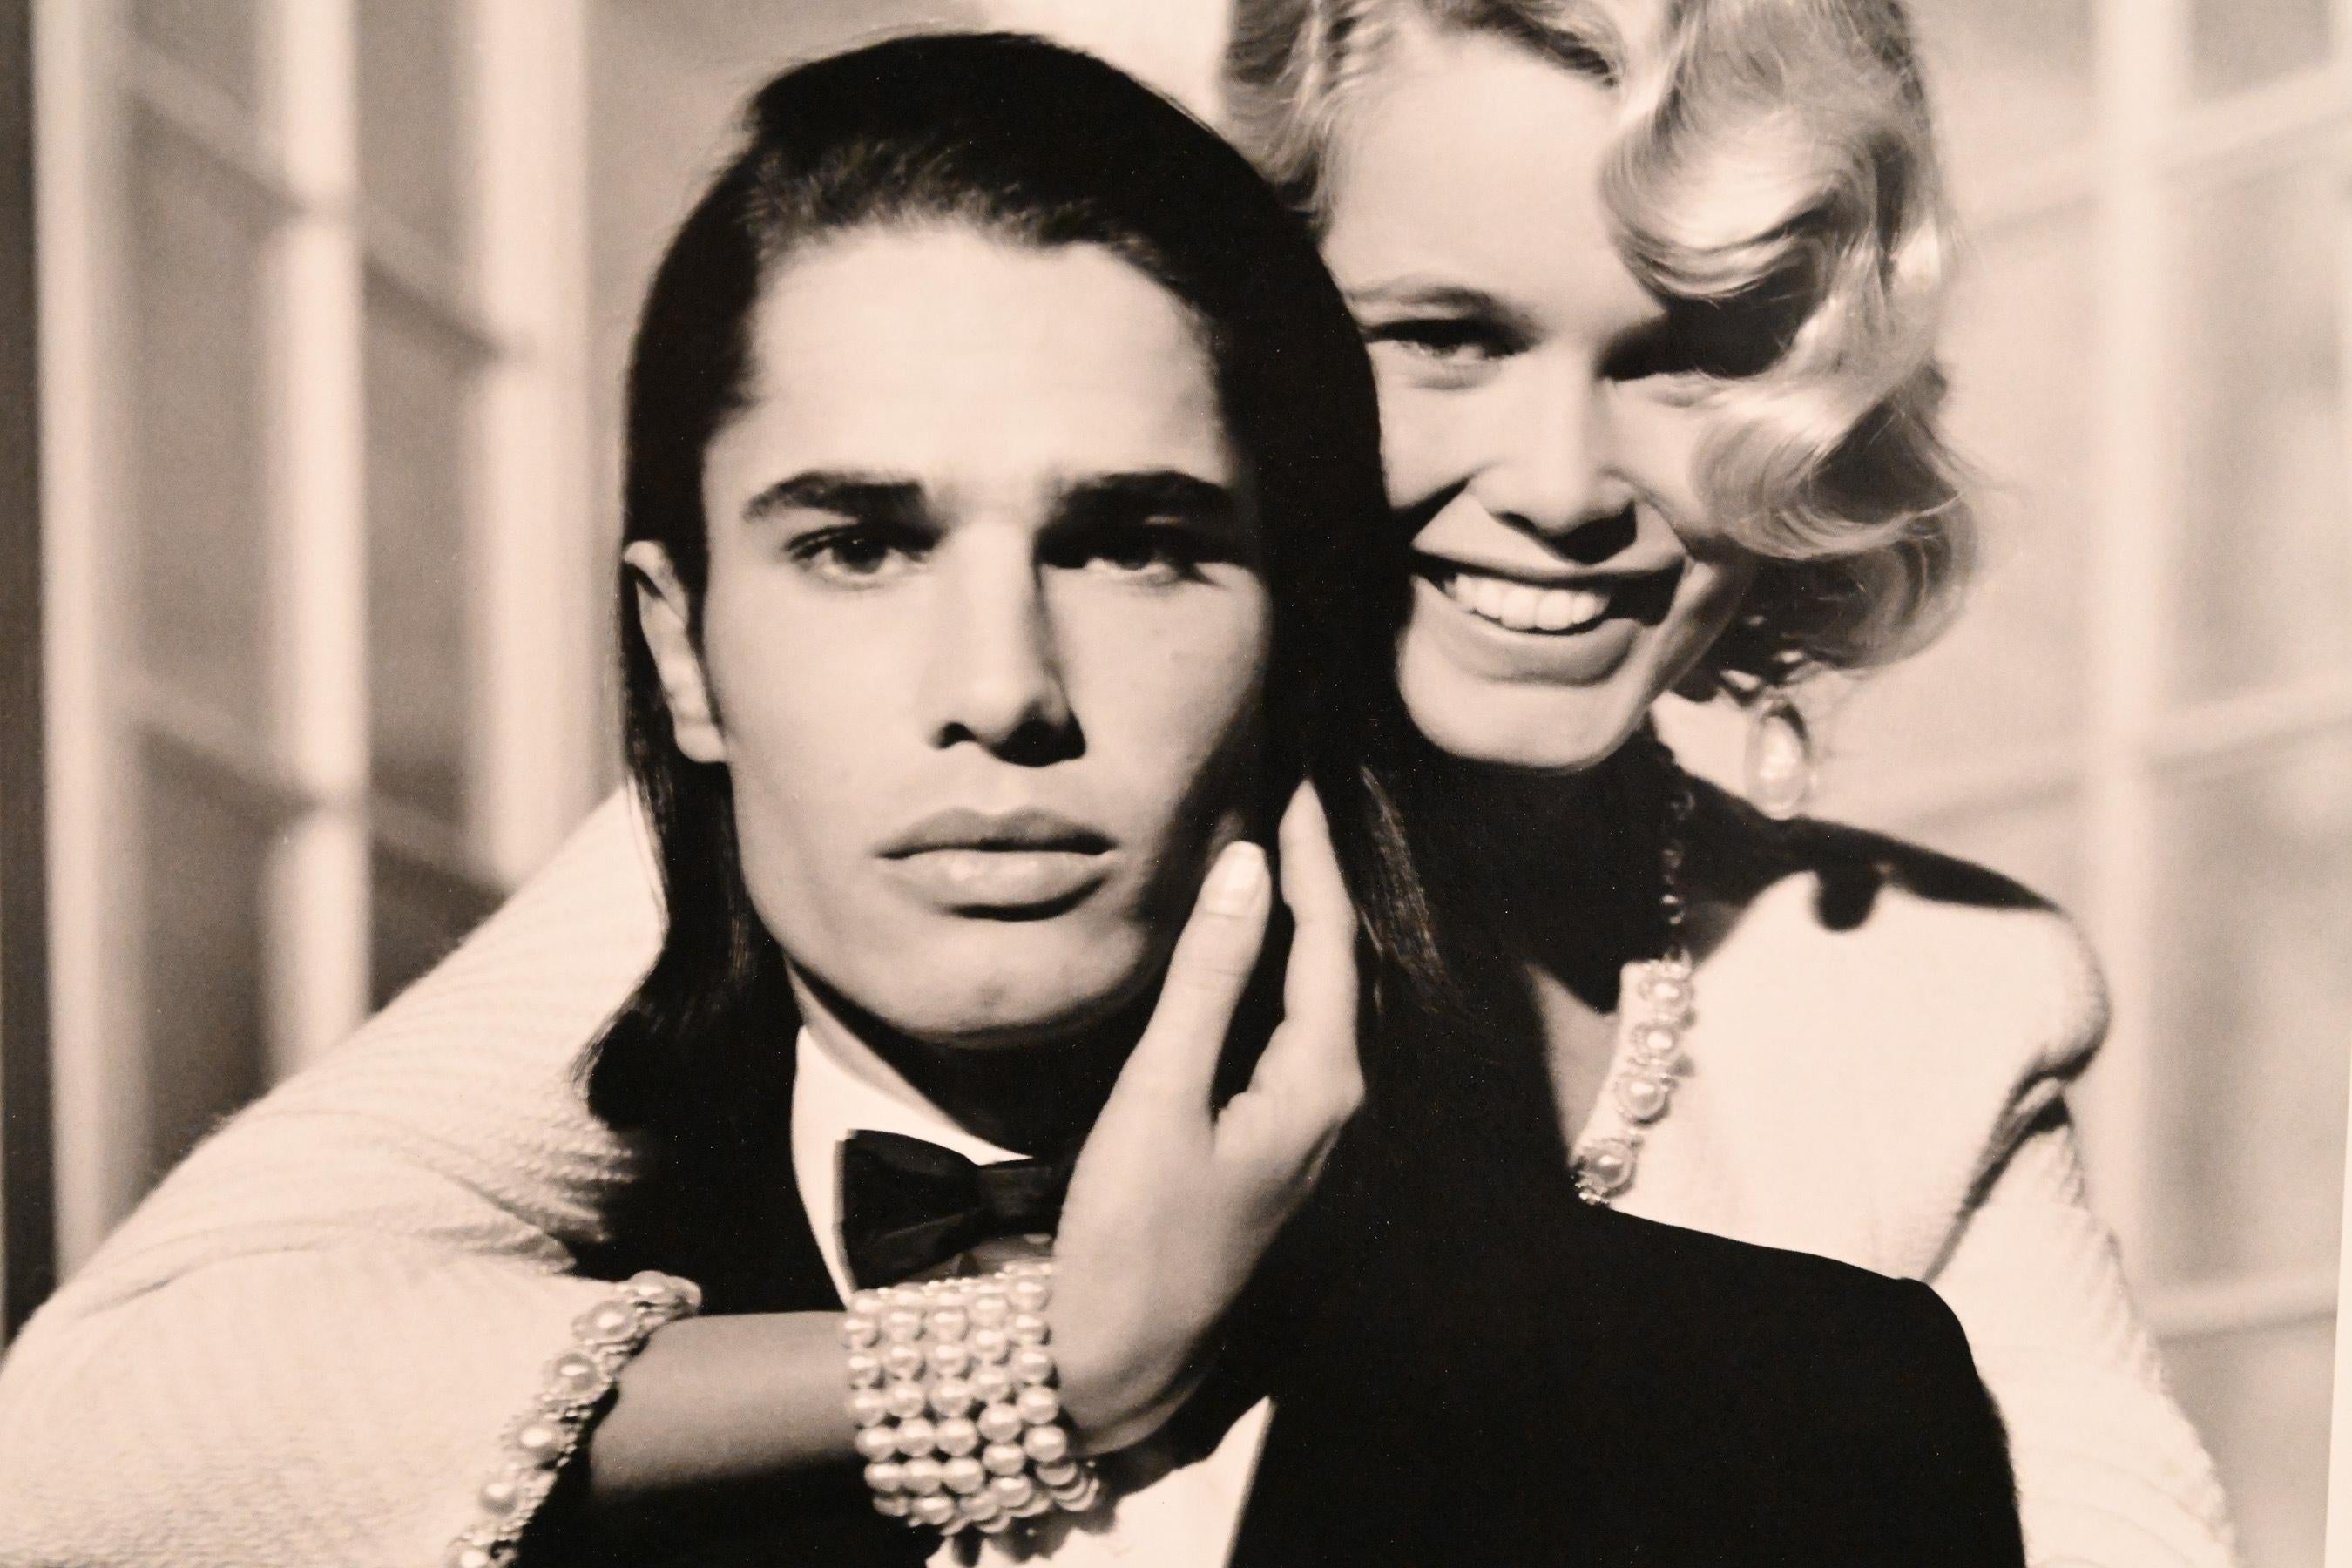 20th Century Original photograph of Claudia Schiffer with Cameron Alborzian by Karl Lagerfeld